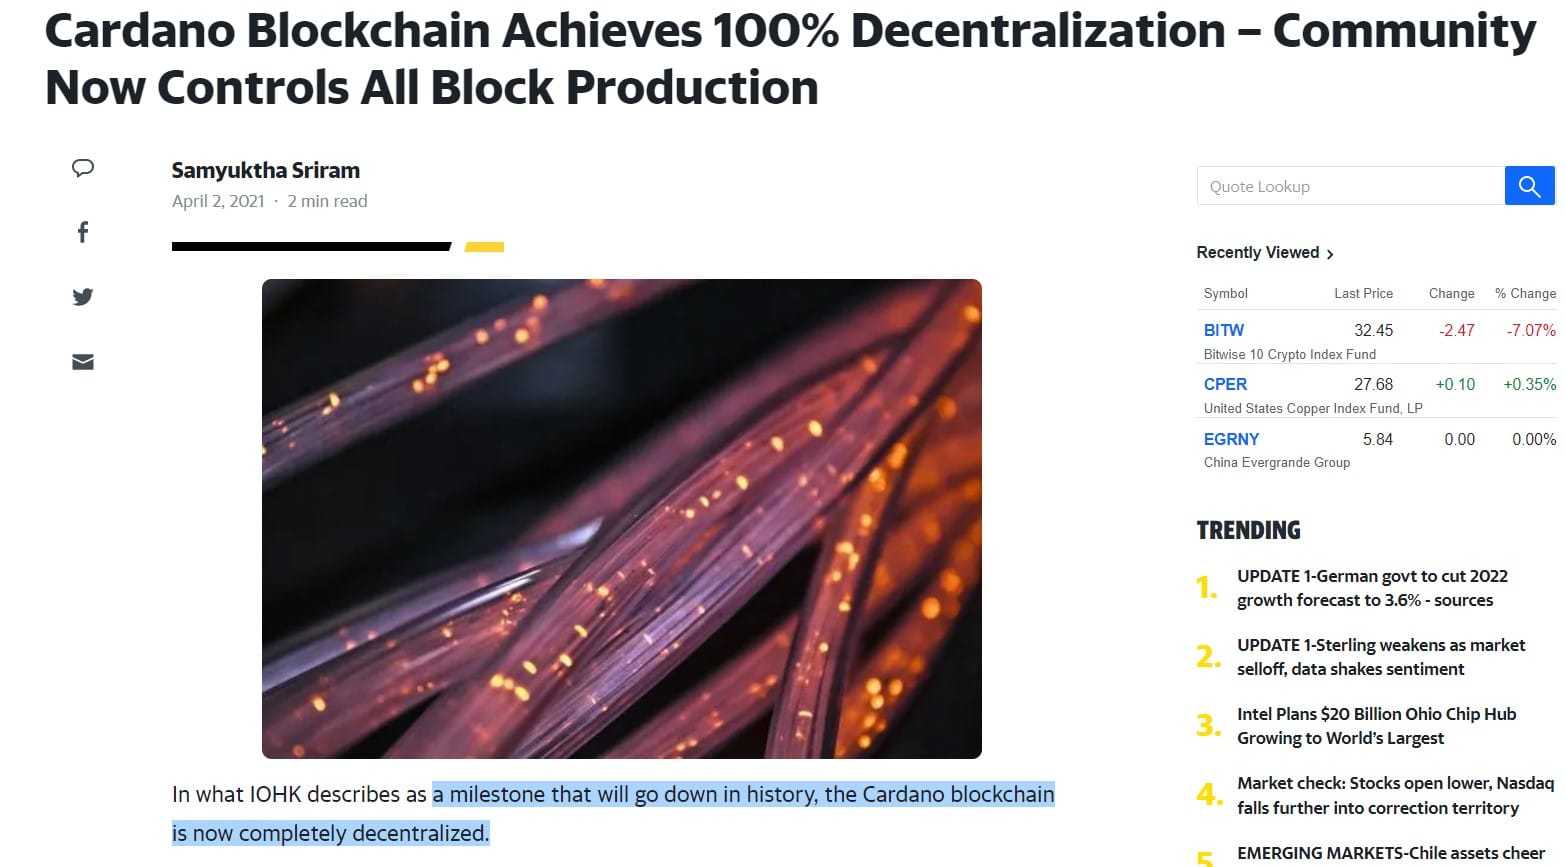 Cardano Blockchain is Highly Decentralized